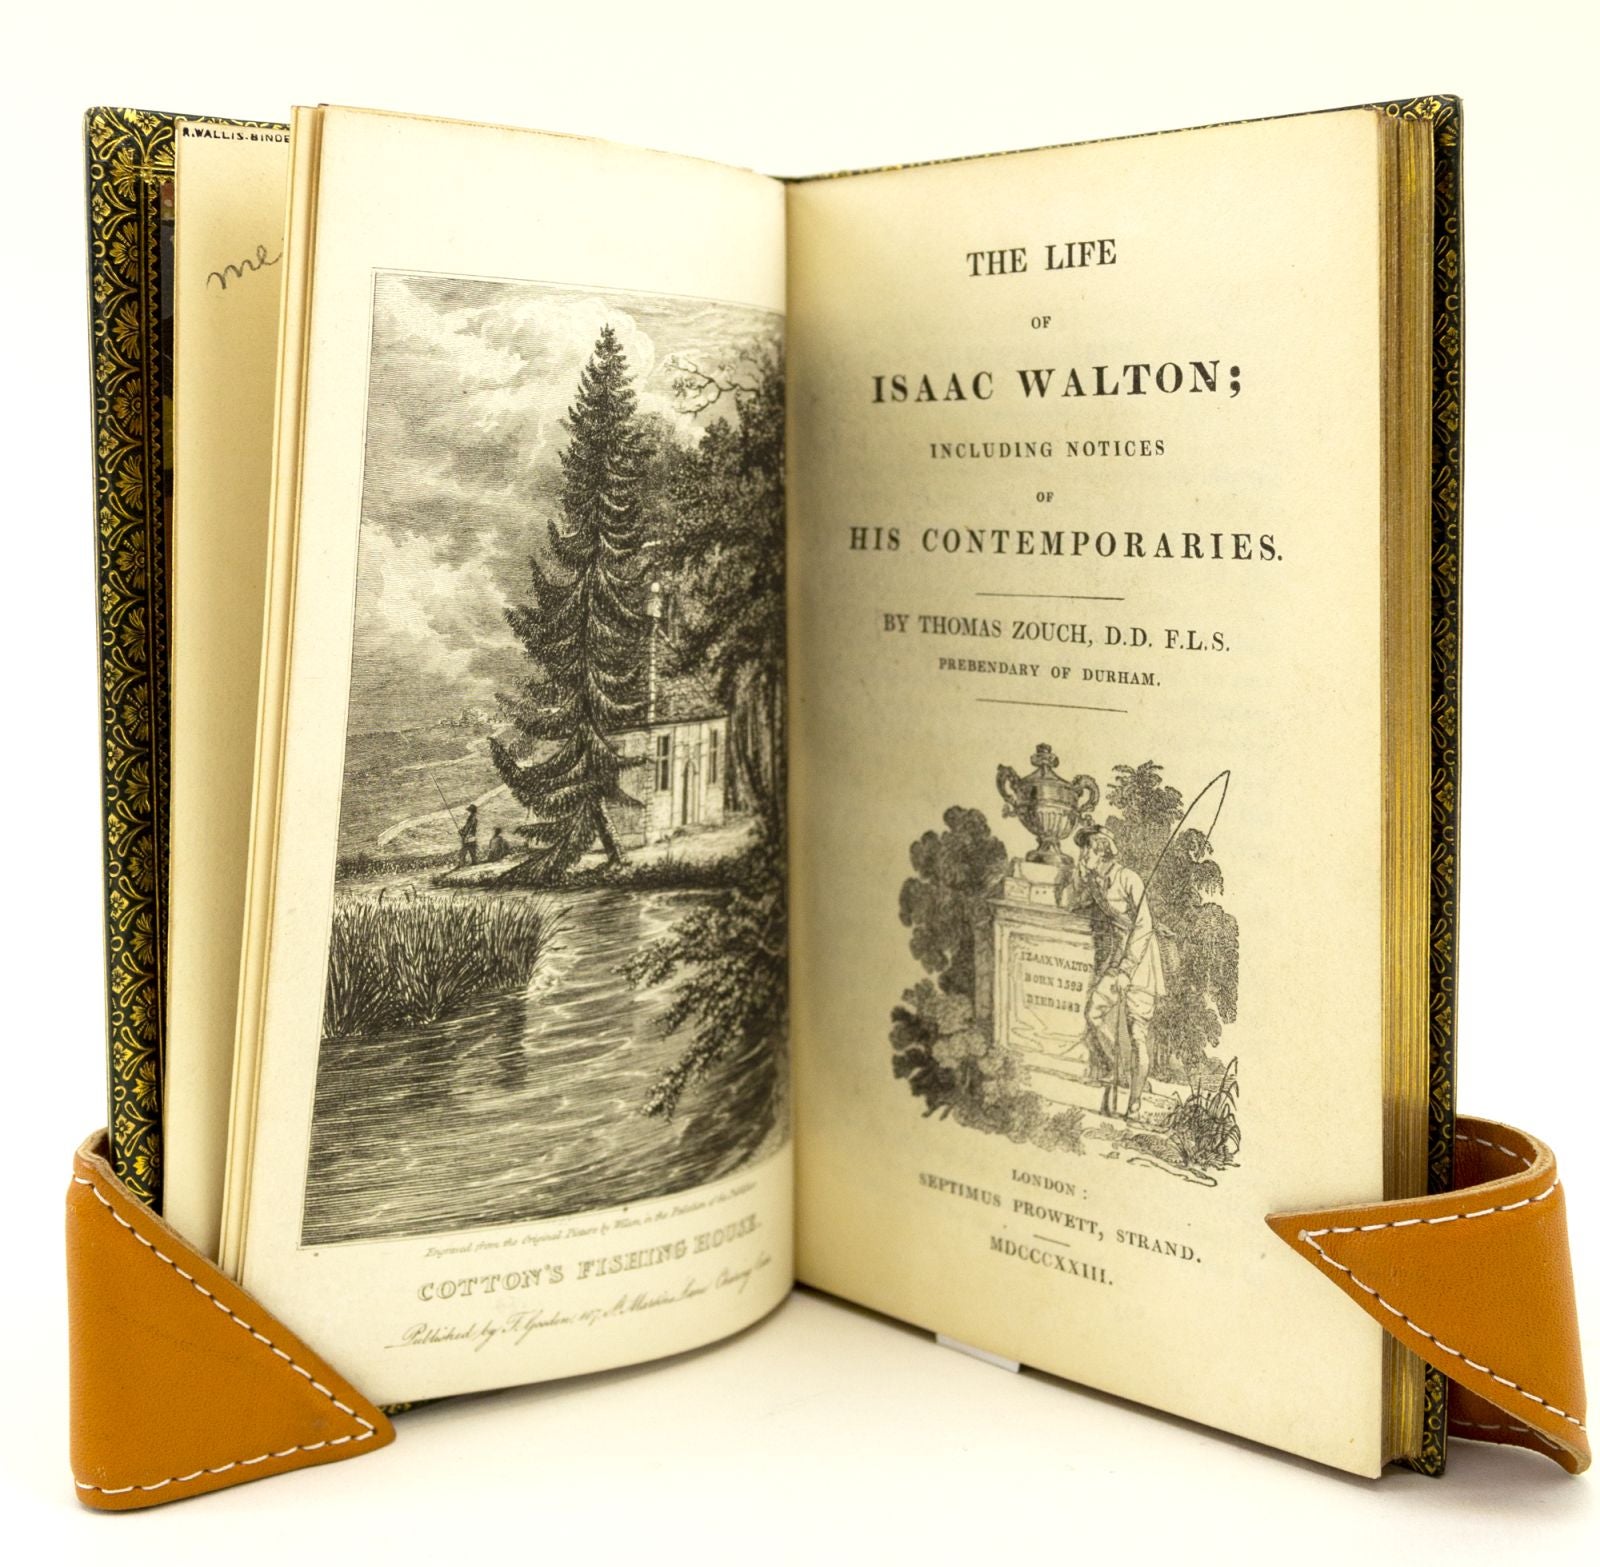 THE LIFE OF ISAAC WALTON; INCLUDING NOTICES OF HIS CONTEMPORARIES by IZAAK  WALTON, THOMAS ZOUCH, BINDINGS - WALLIS on Phillip J. Pirages Fine Books 